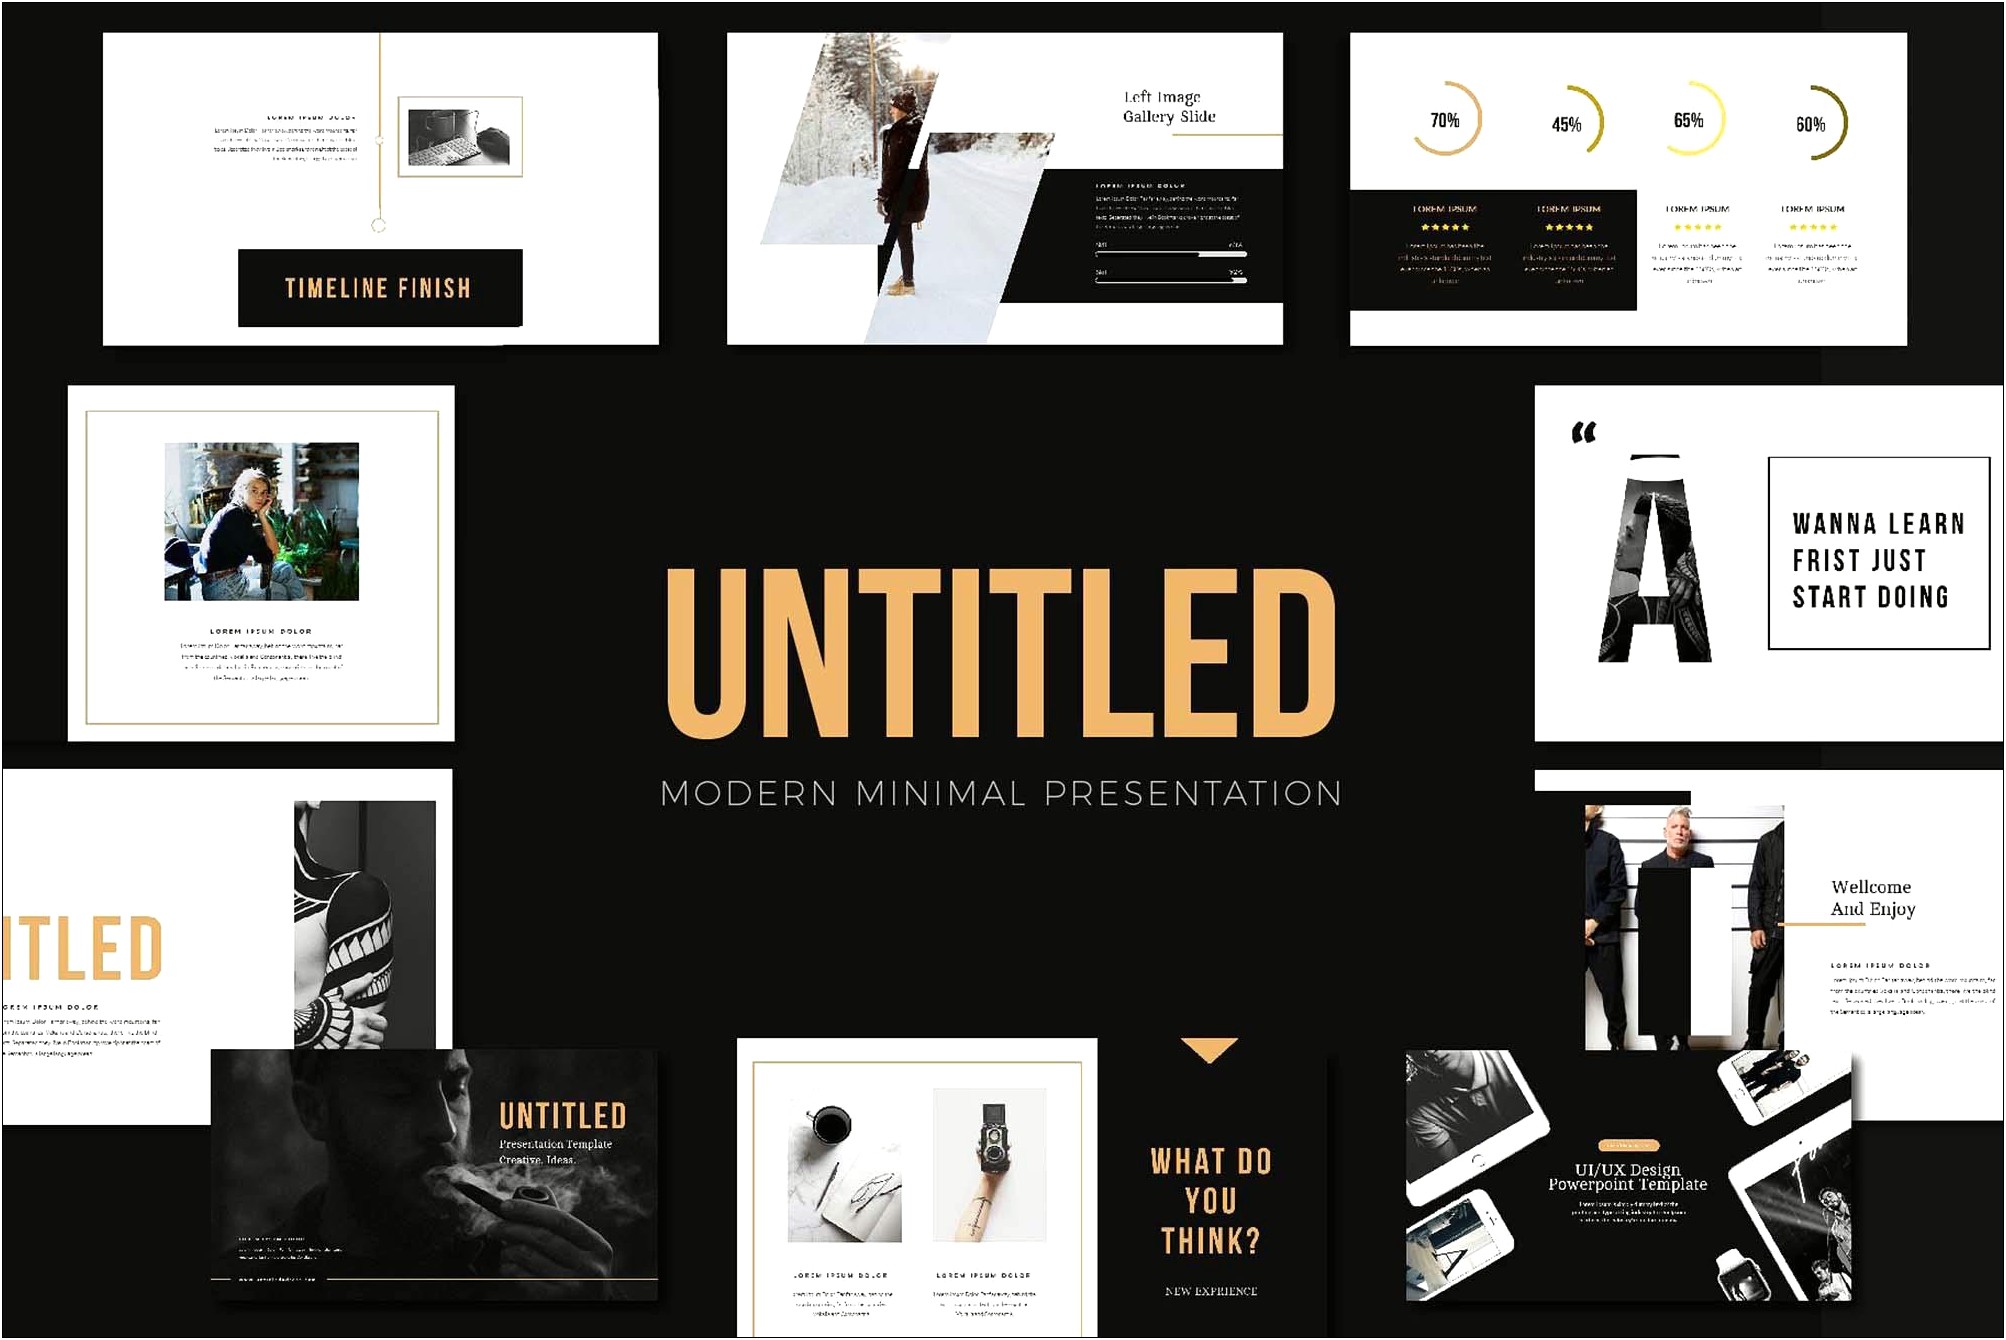 Professional Powerpoint Presentation Templates Free Download